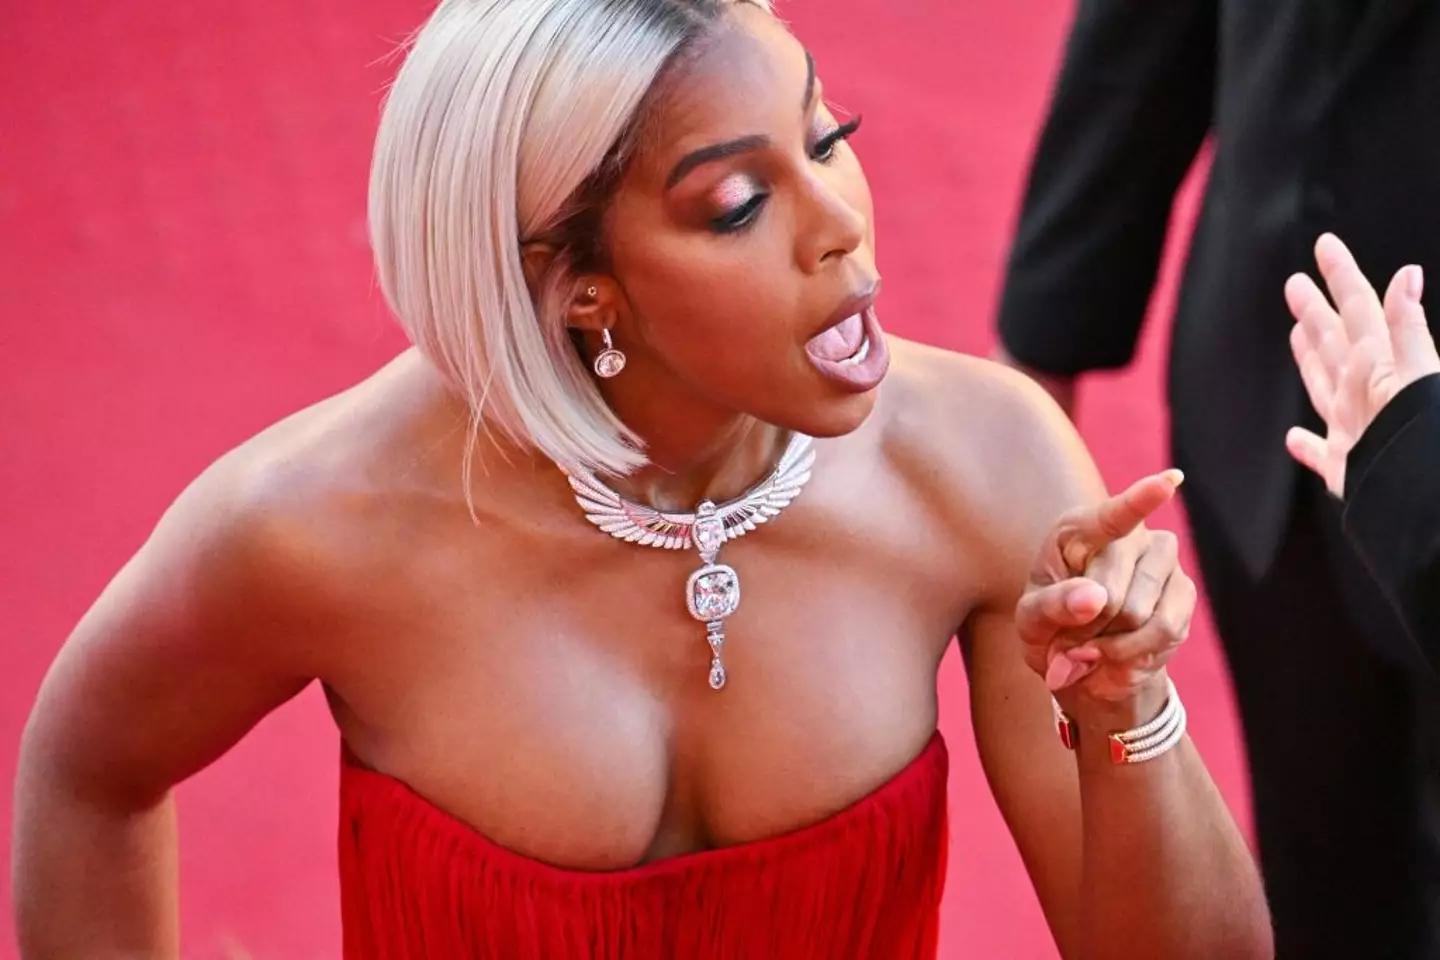 The 'Dilemma' singer appeared to get into a heated exchange with a security guard on the red carpet. (ANTONIN THUILLIER / Contributor / Getty Images)